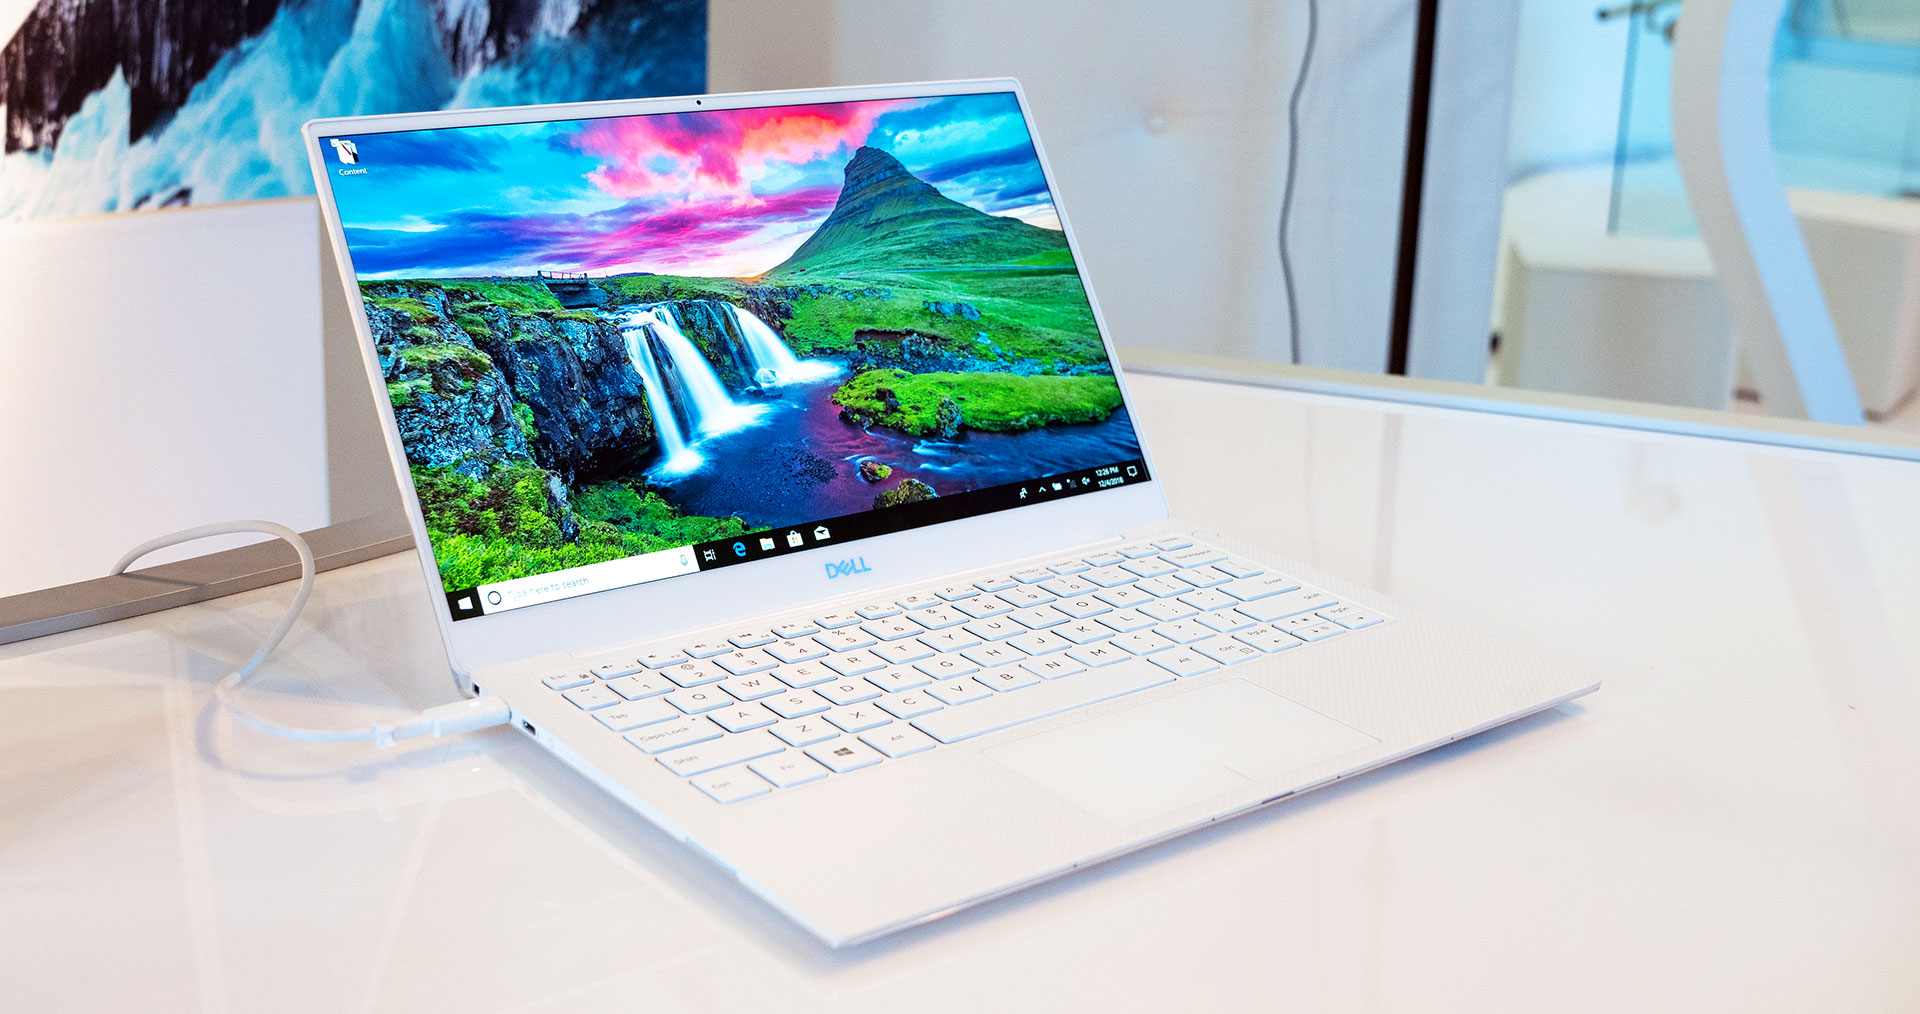 Dell XPS 13 9380 2019 - reviews, what's changed from the XPS 13 9370